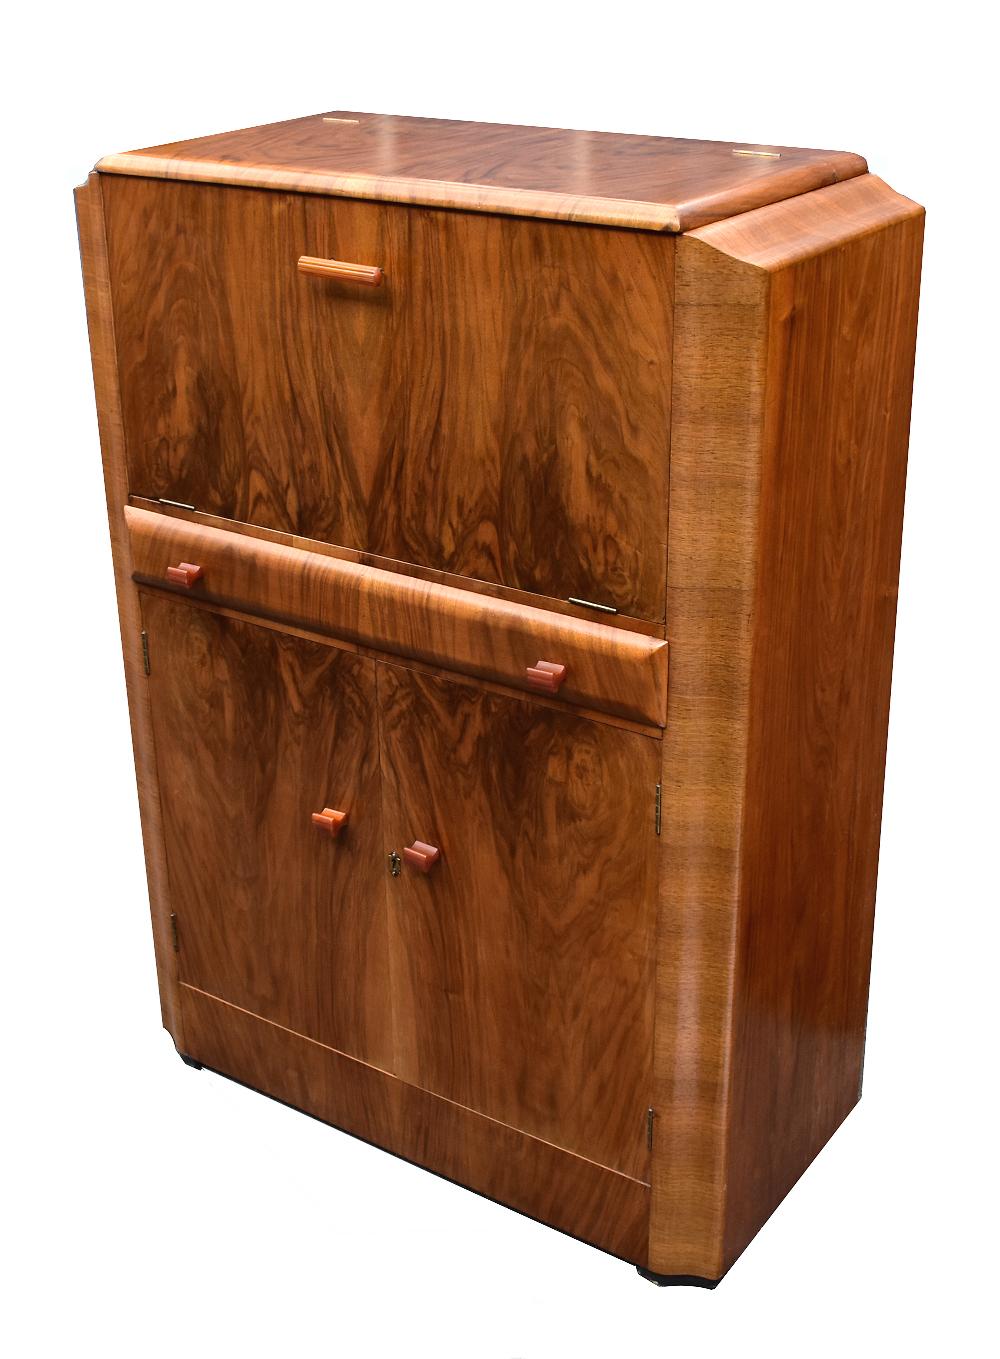 English Art Deco Fitted Burr Walnut Cocktail Cabinet or Dry Bar 2